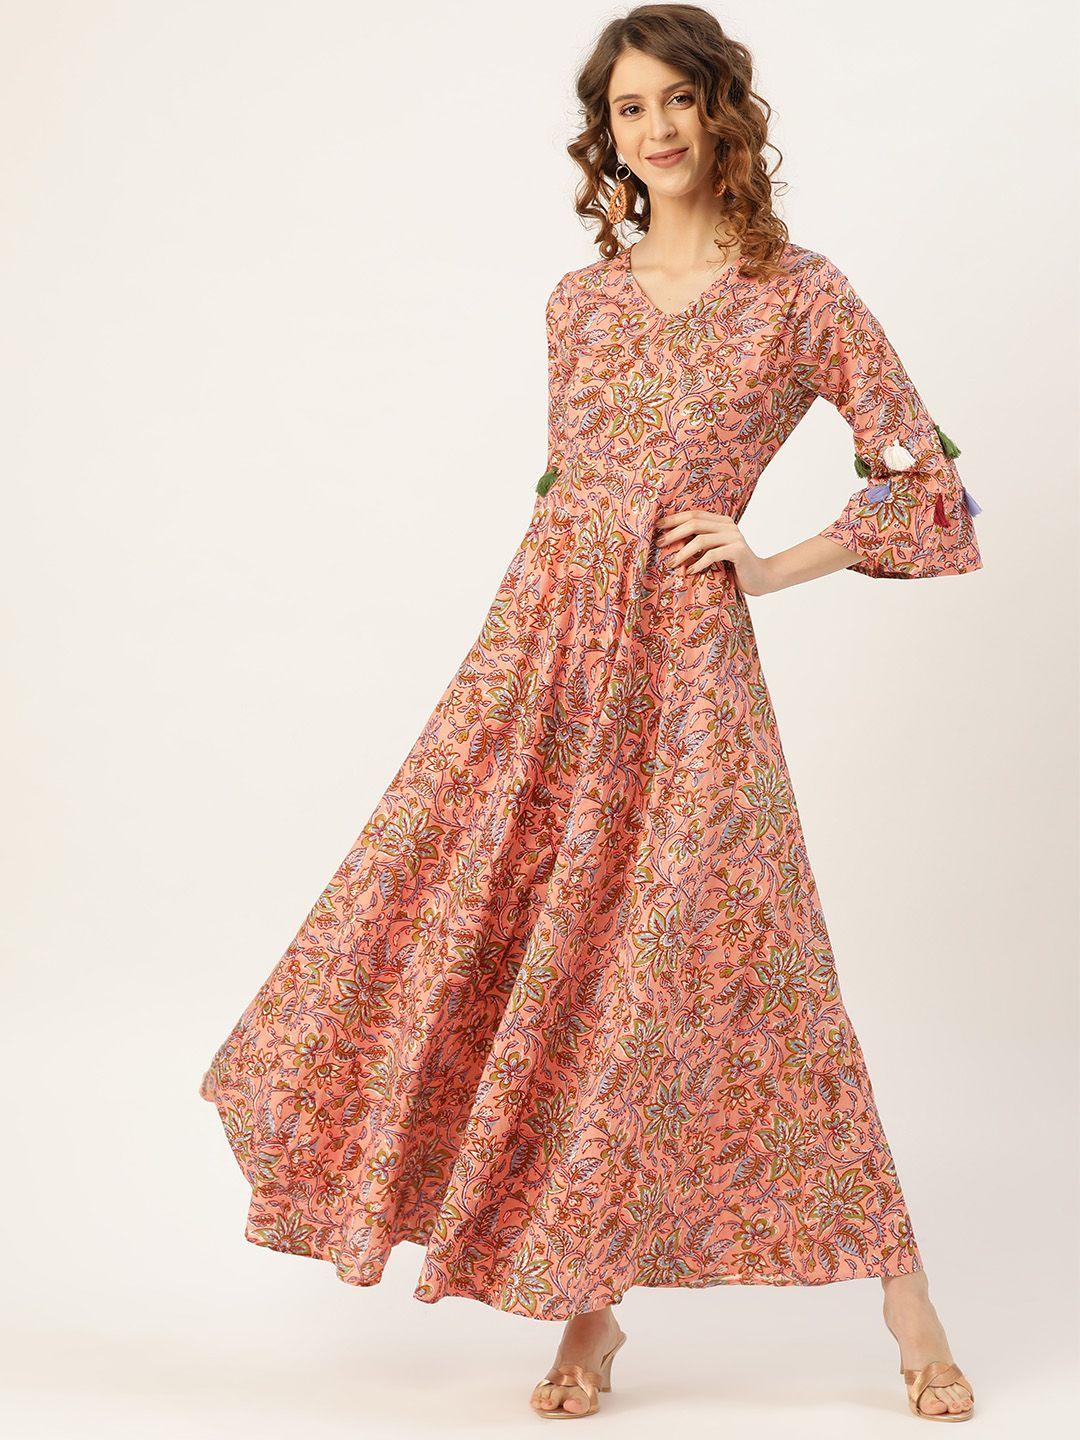 shae-by-sassafras-women-peach-coloured-&-olive-green-floral-printed-maxi-dress